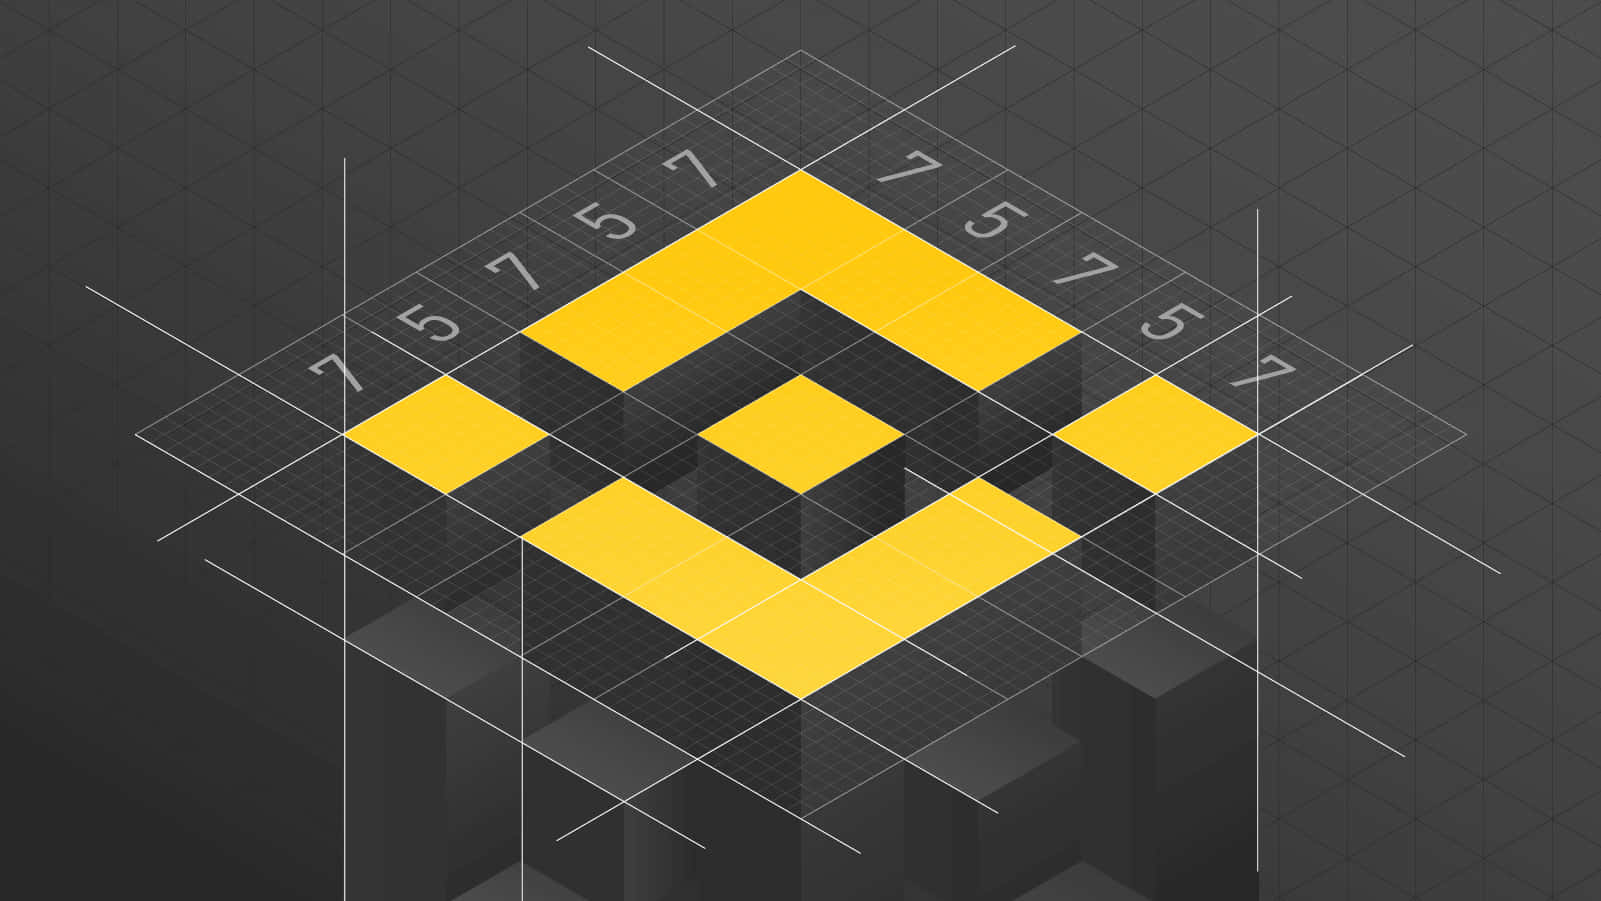 Tap into the world of financial opportunities with Binance